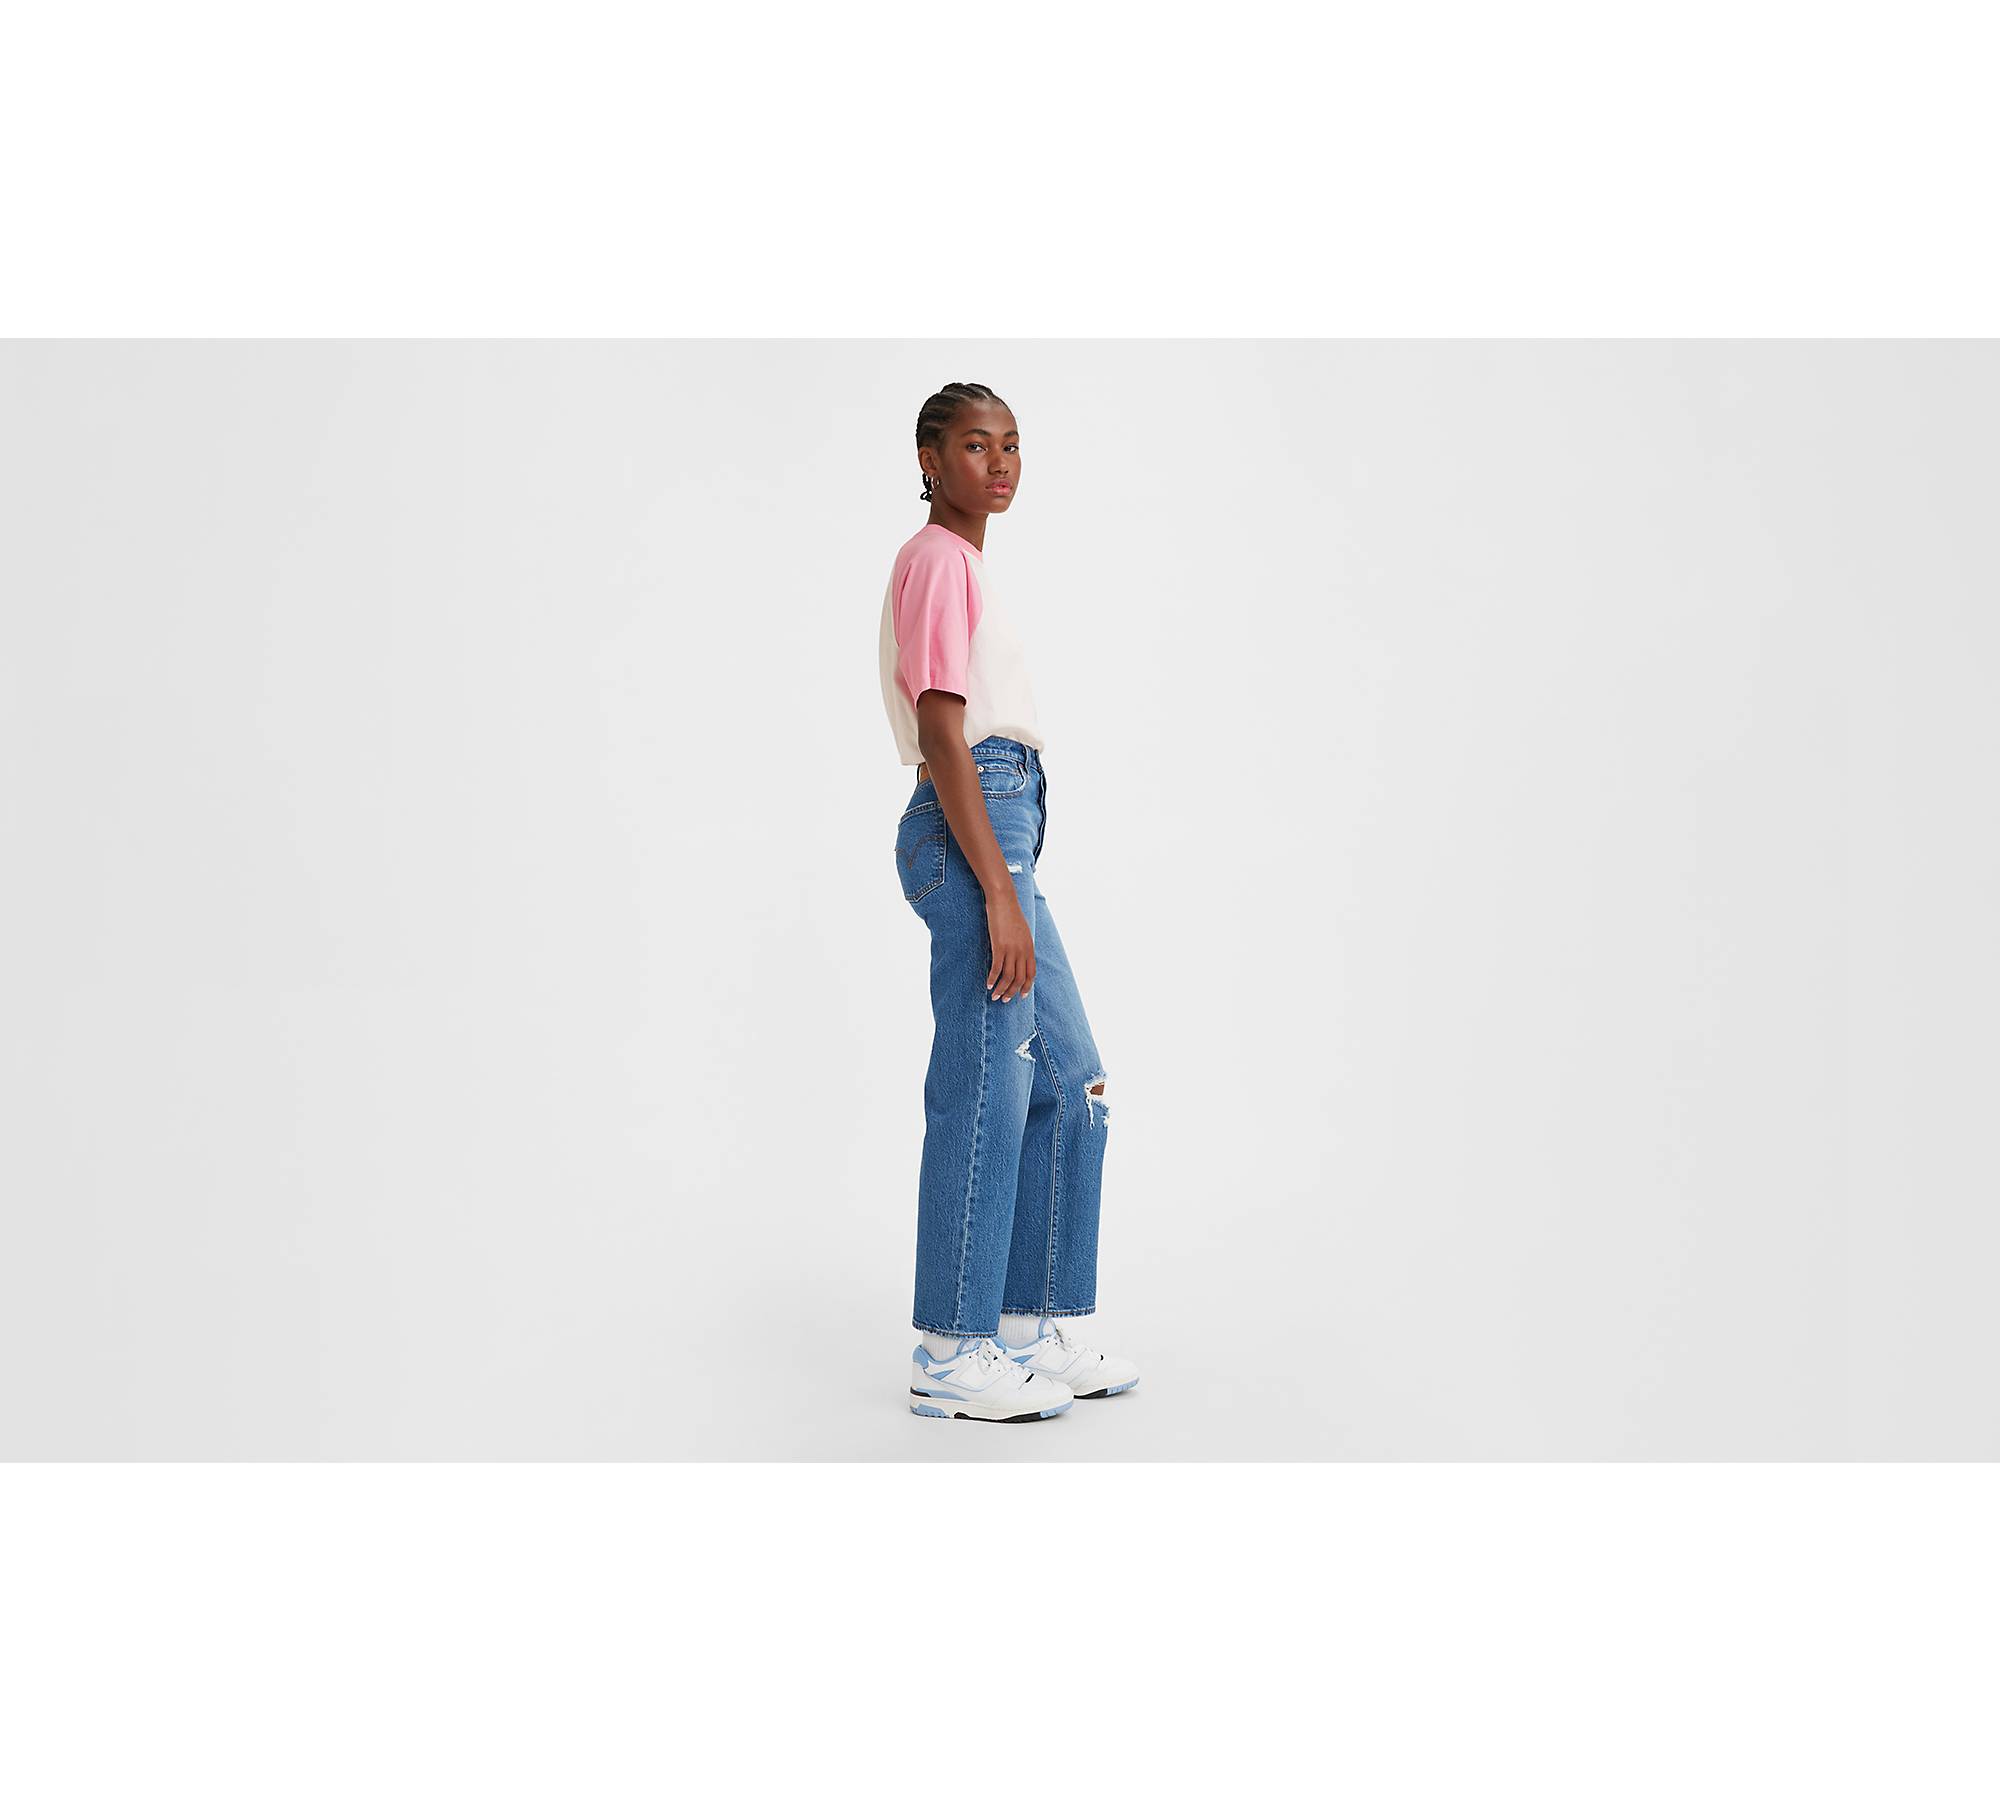 Levi's Ribcage Straight Leg Ankle Jean Jive Together